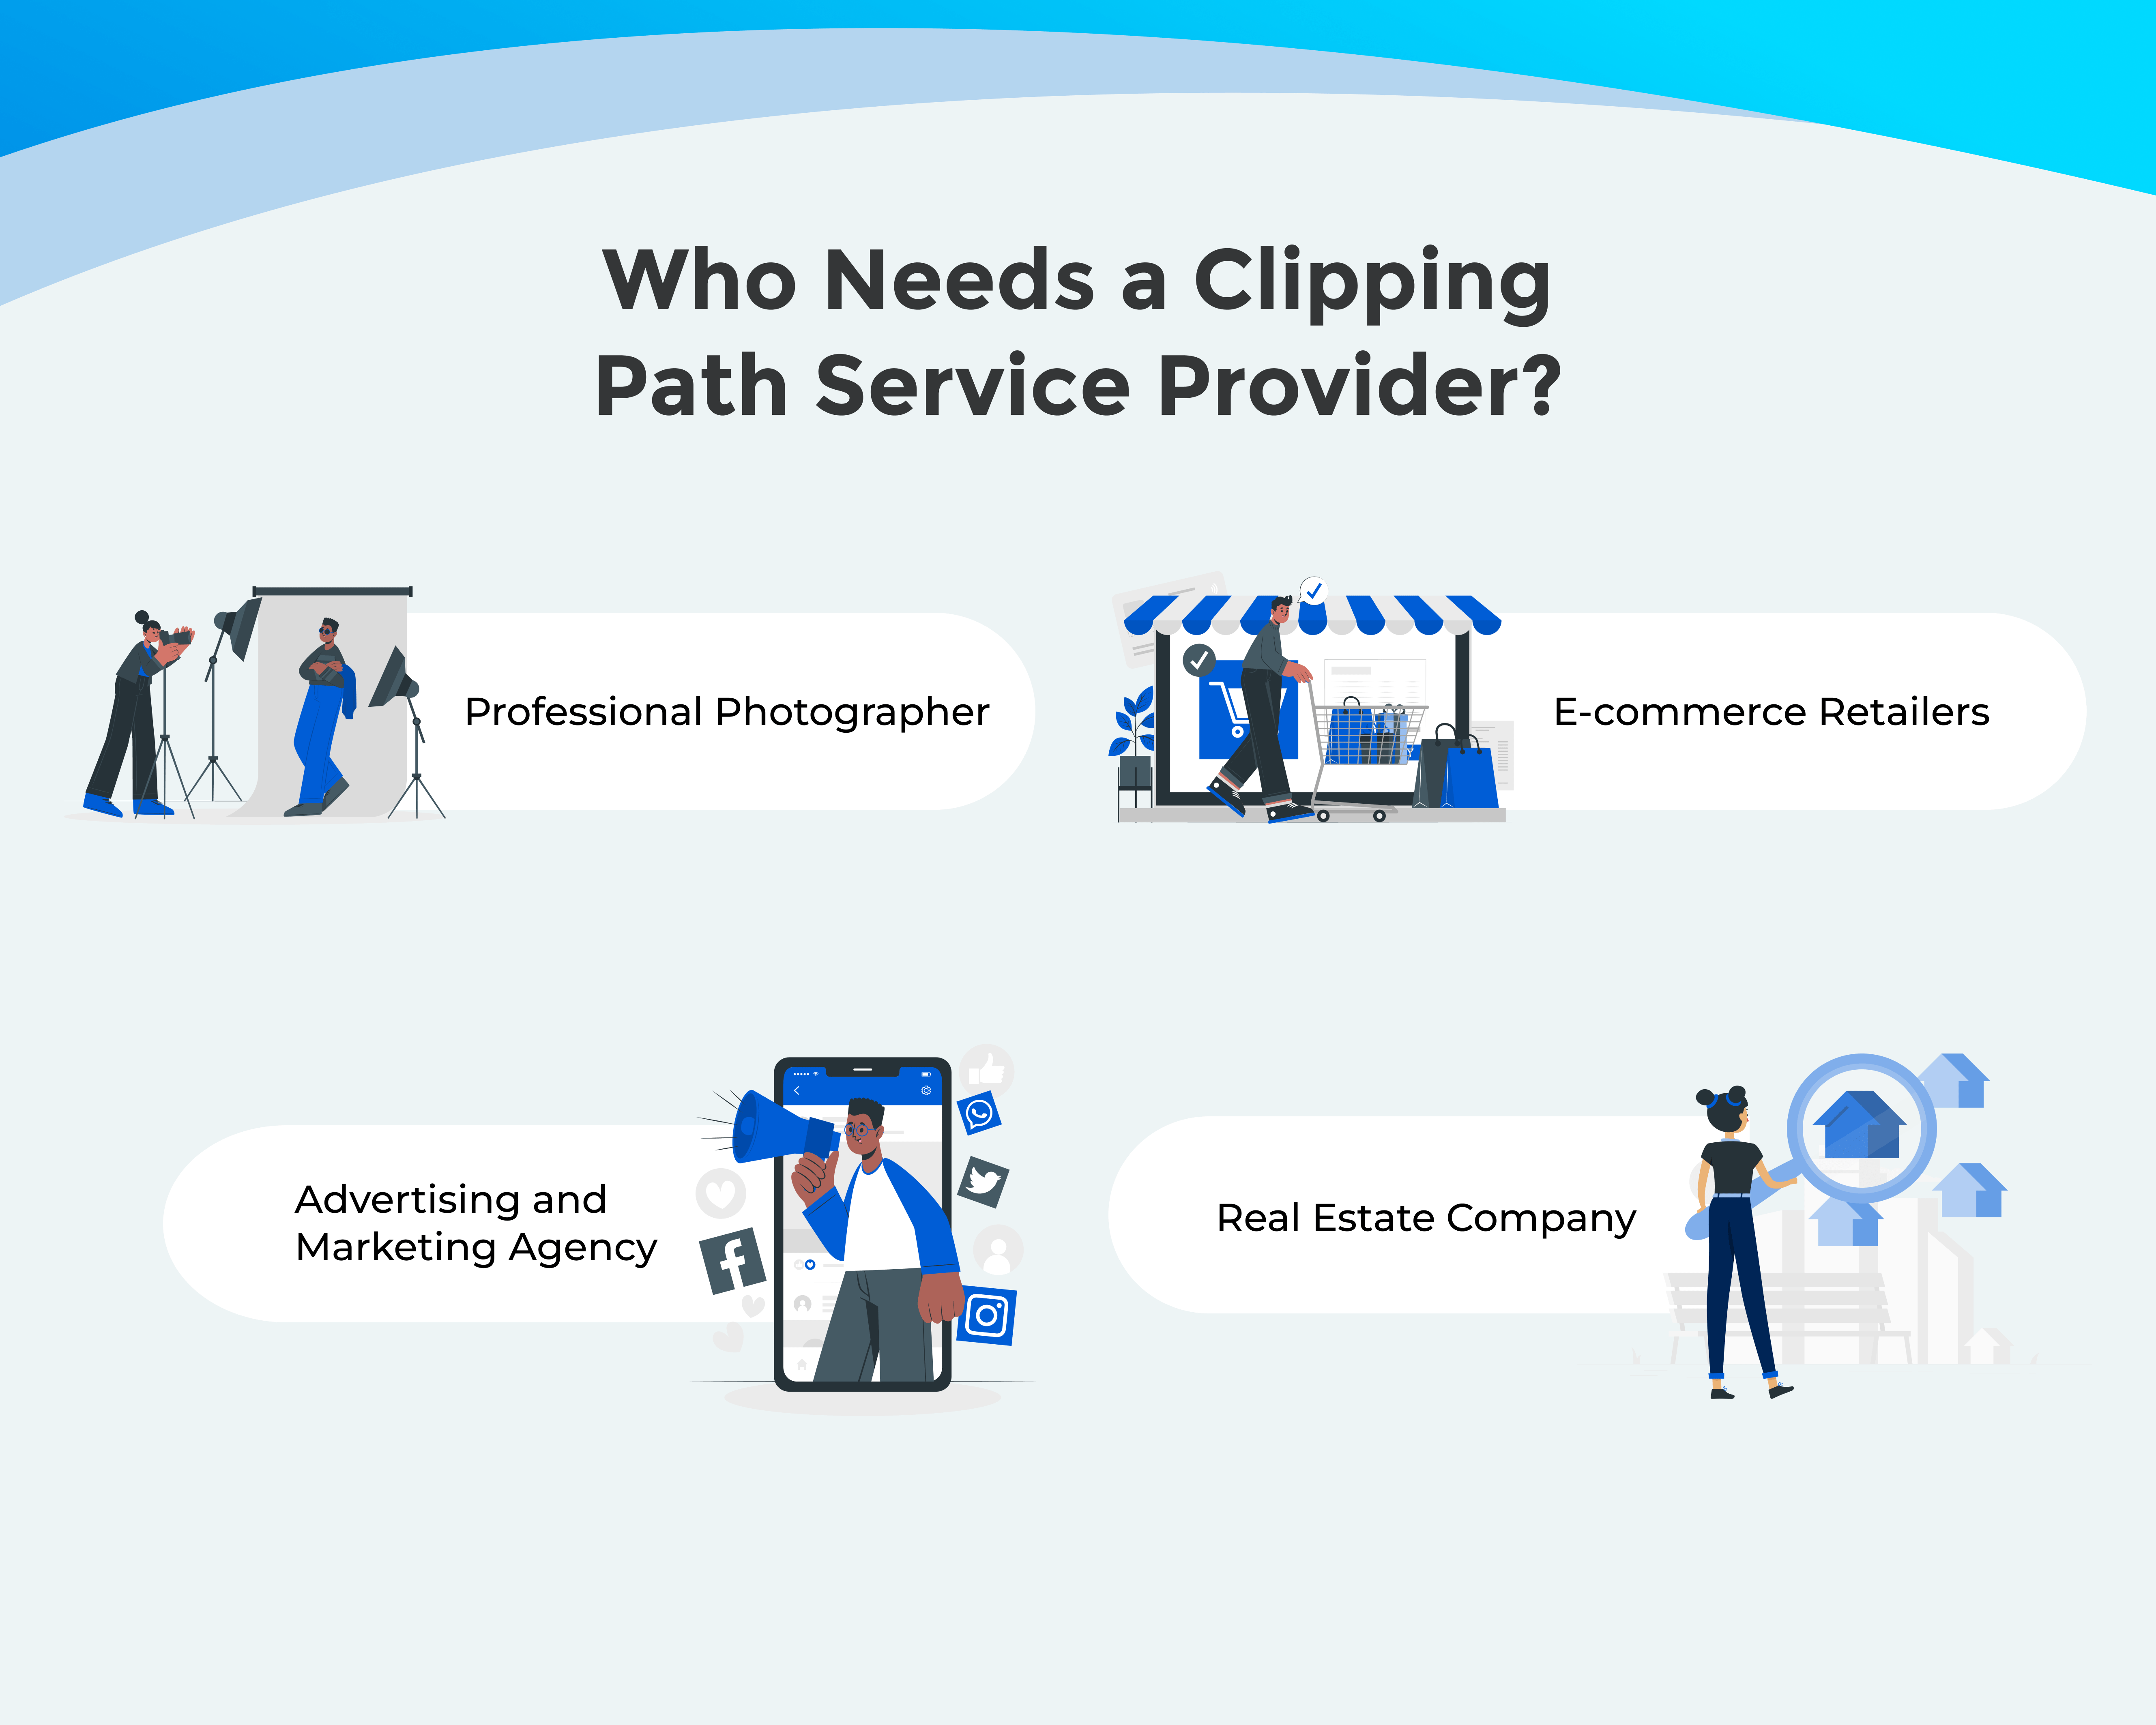 Who needs a clipping path service provider  - Infographic